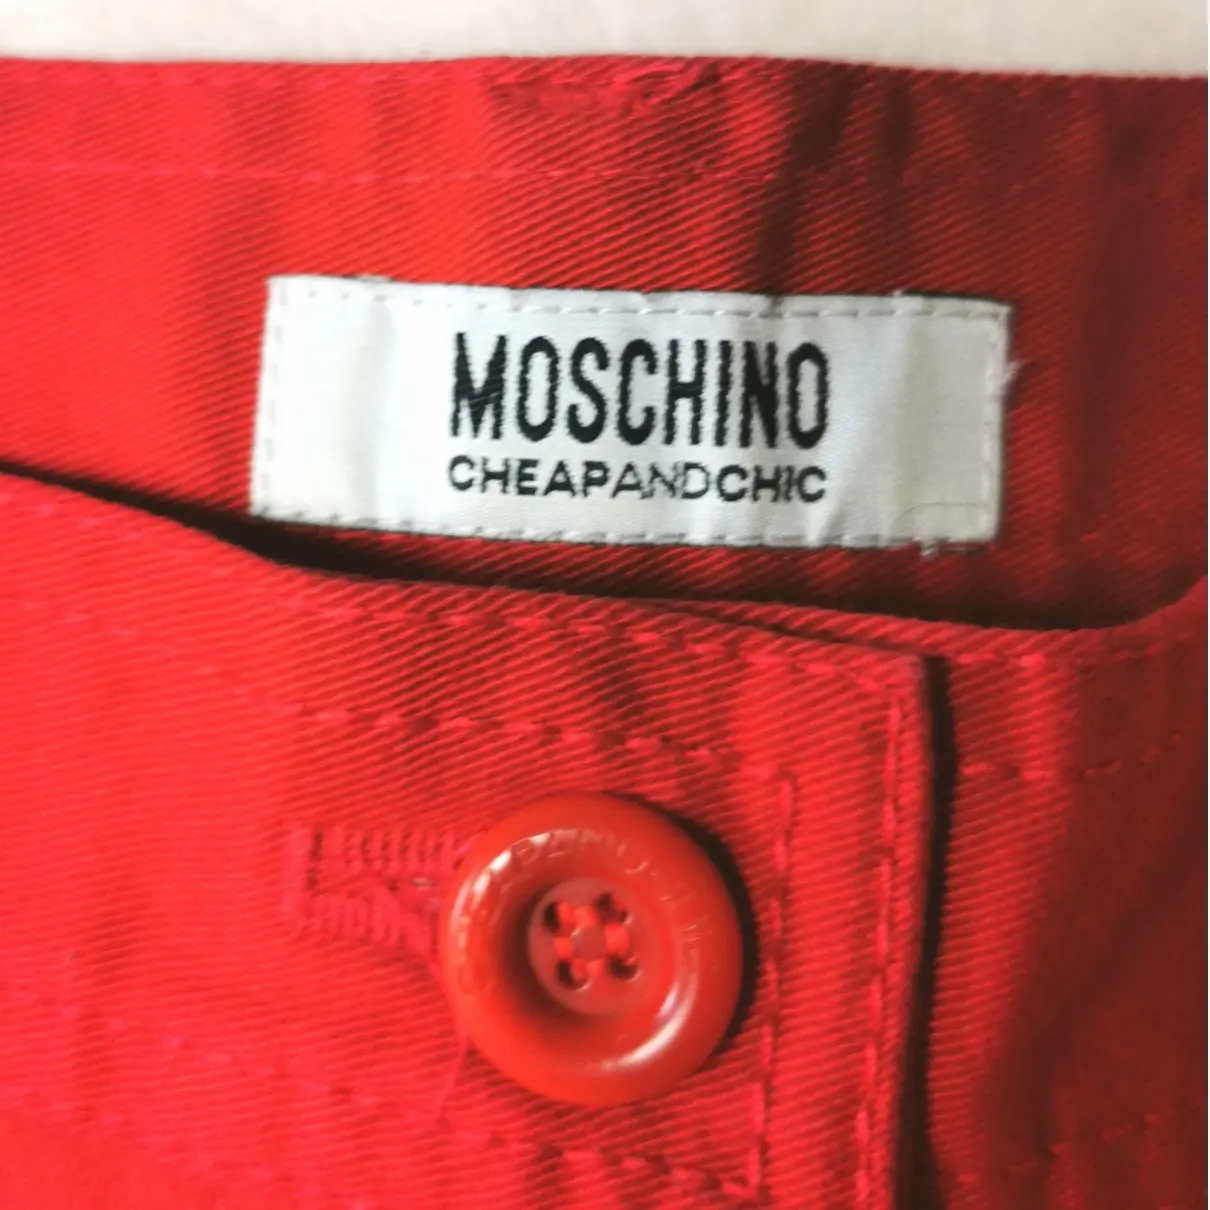 Luxury Moschino Cheap And Chic Trousers Women - Vintage